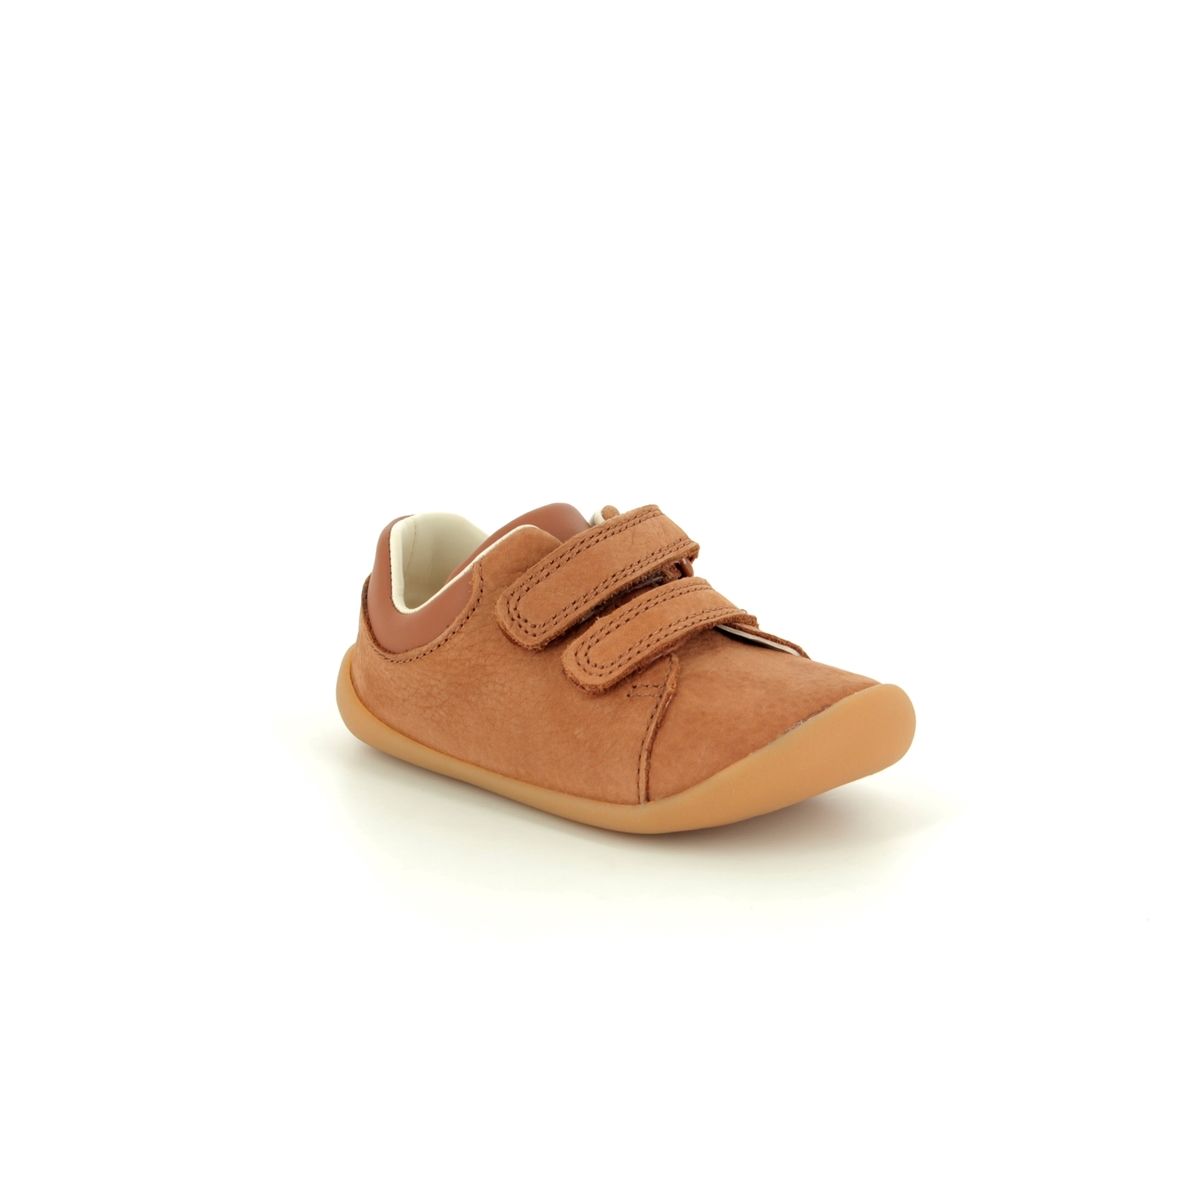 Clarks Roamer Craft T Tan Leather Kids Boys First Shoes 4229-07G in a Plain Leather in Size 4.5